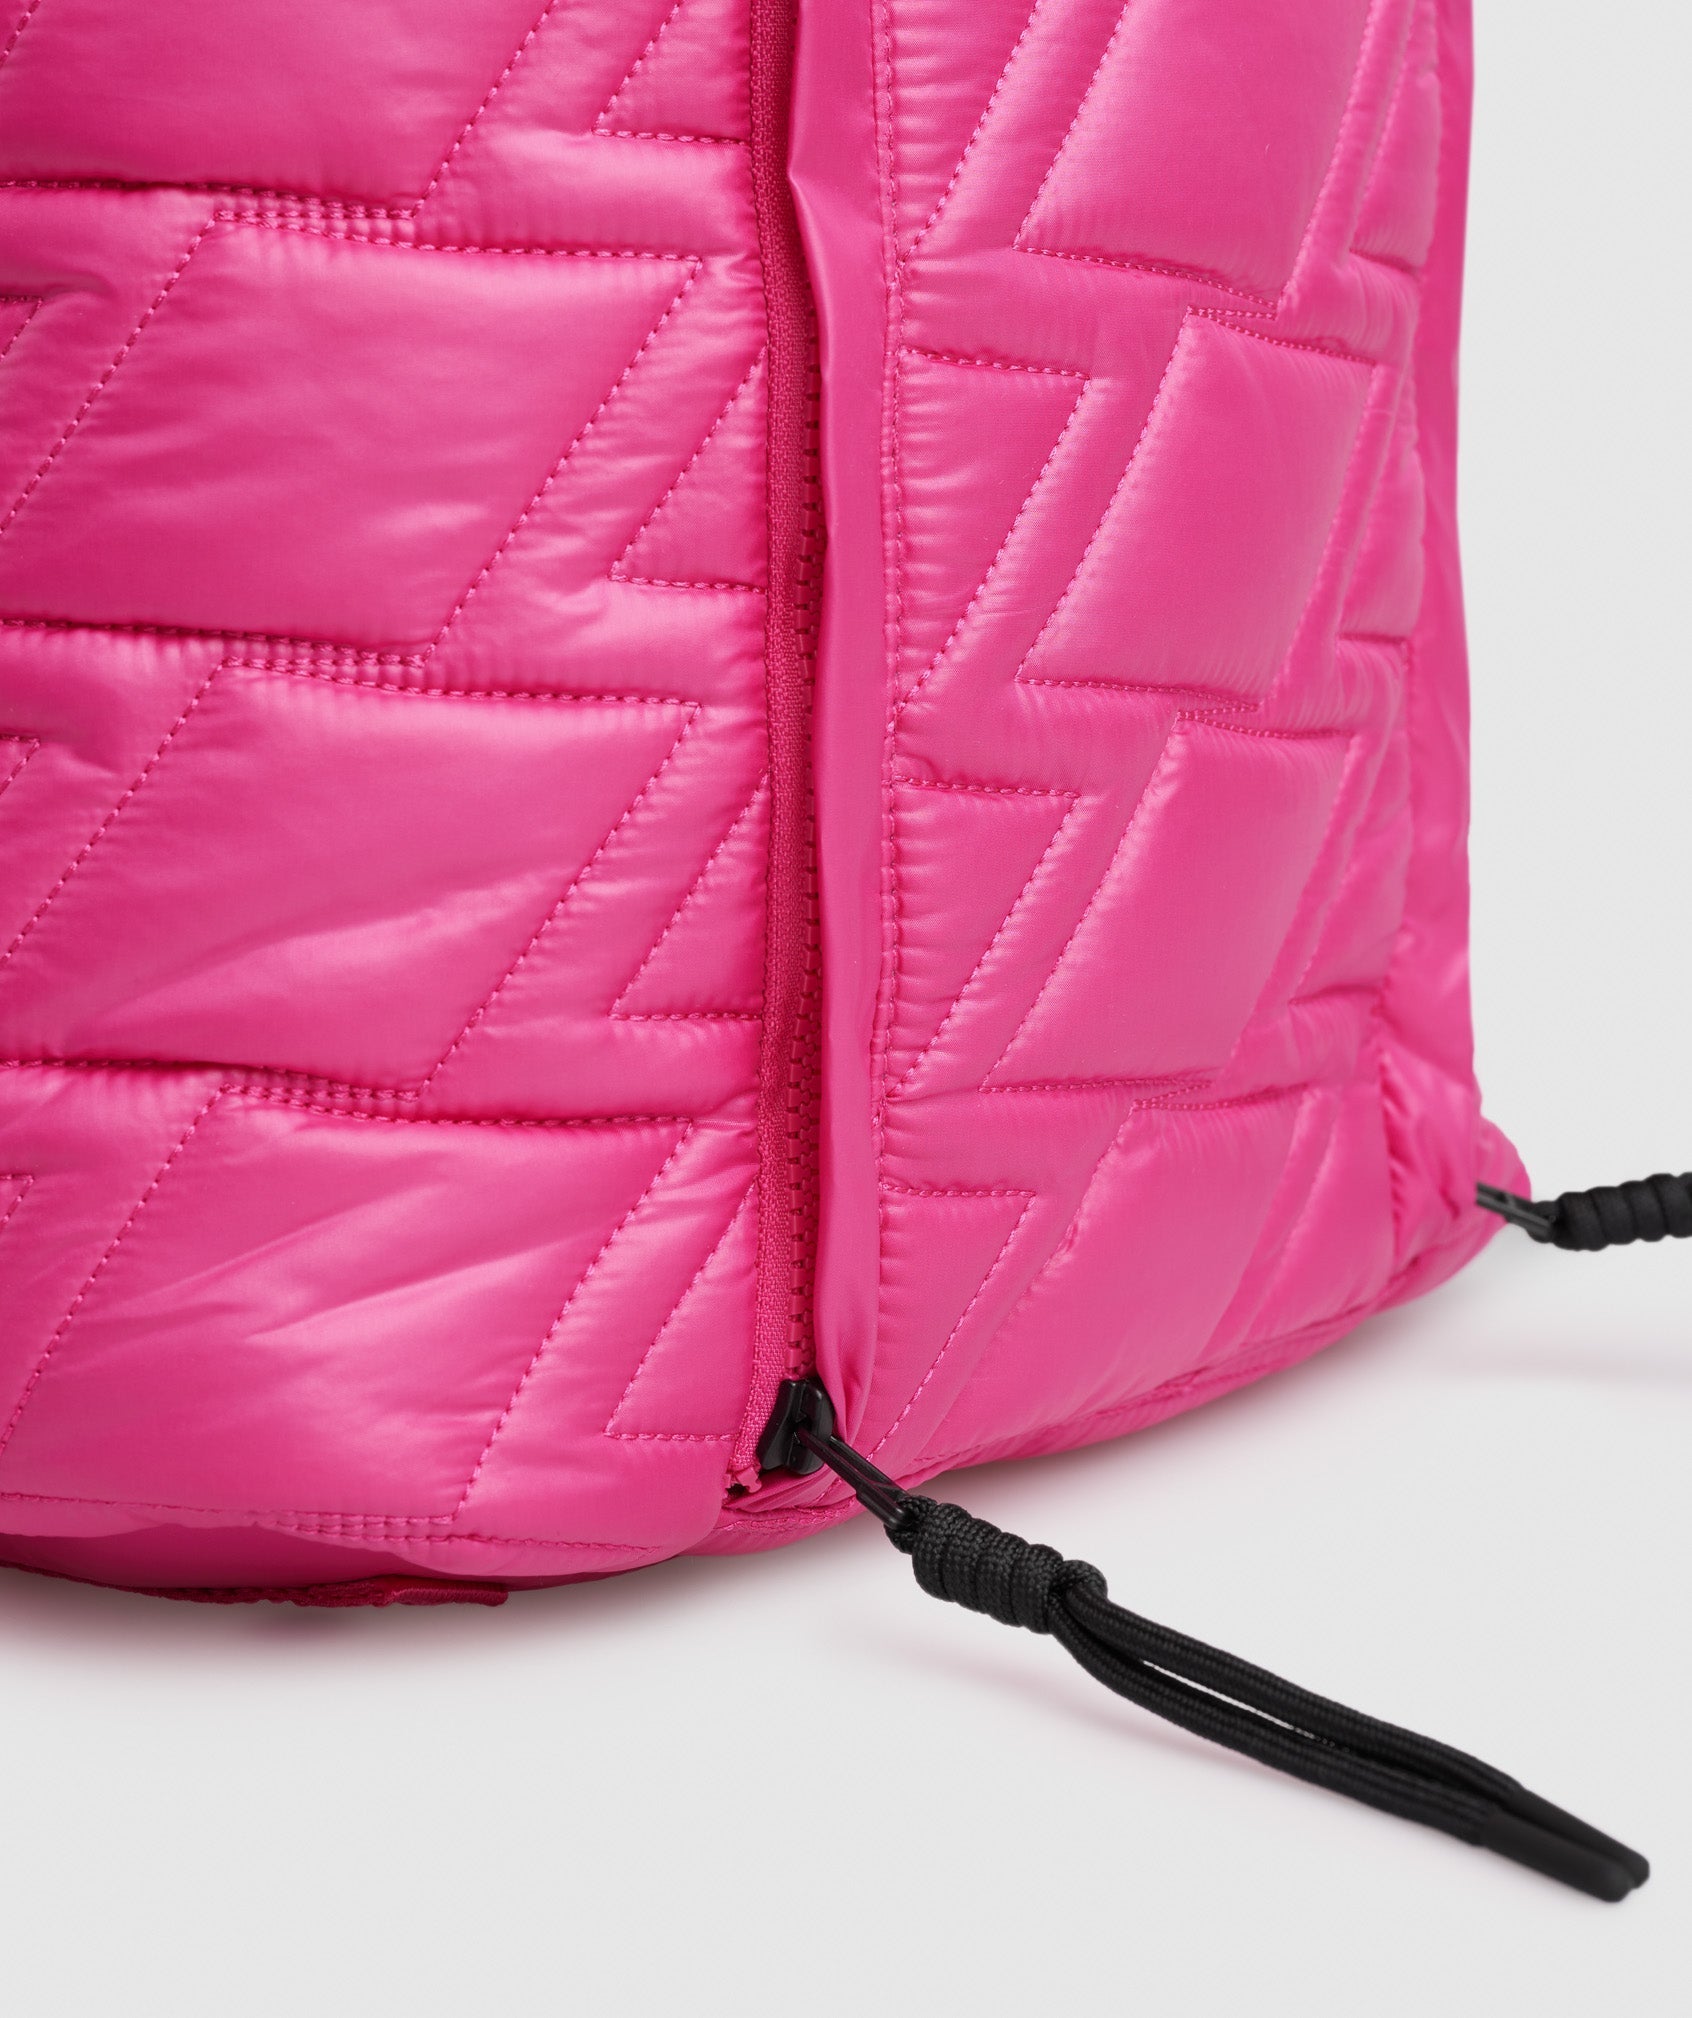 Quilted Yoga Tote in Bold Magenta - view 4